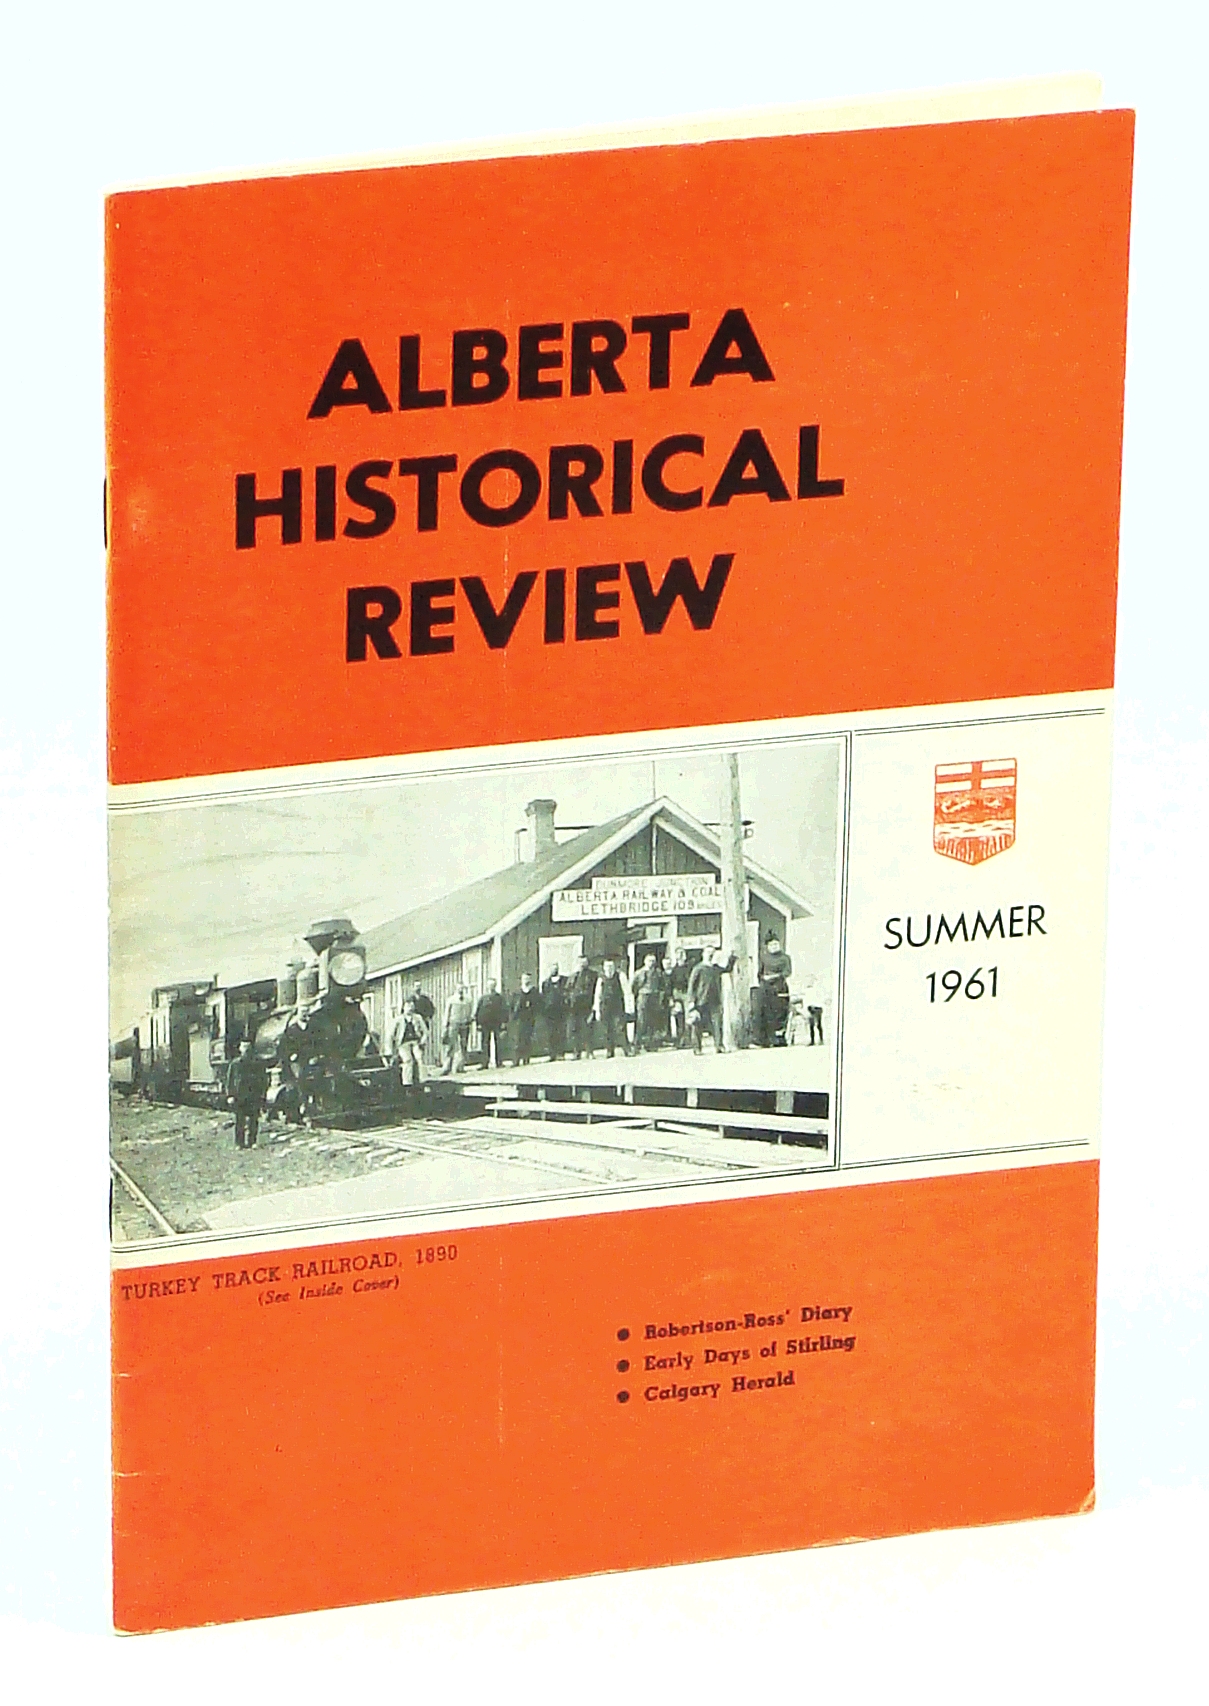 Image for Alberta Historical Review, Volume 9, Number 3, Summer 1961 - Robertson-Ross' Diary